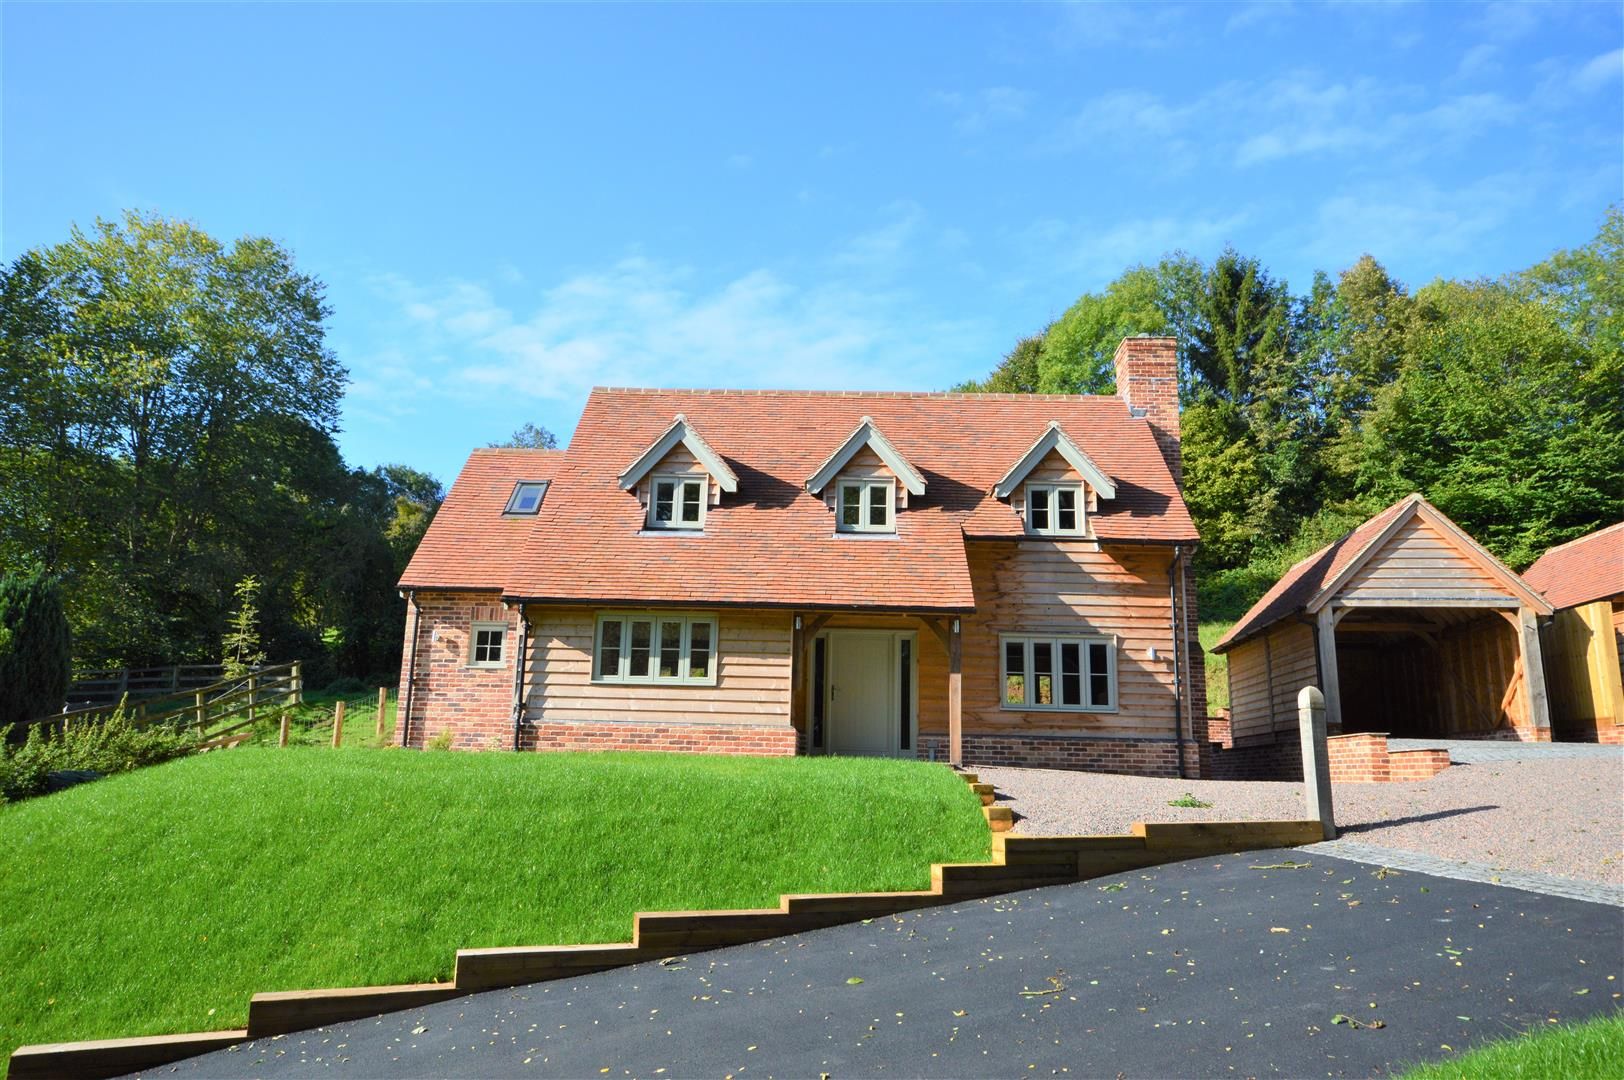 3 bed detached for sale in Dilwyn - Property Image 1